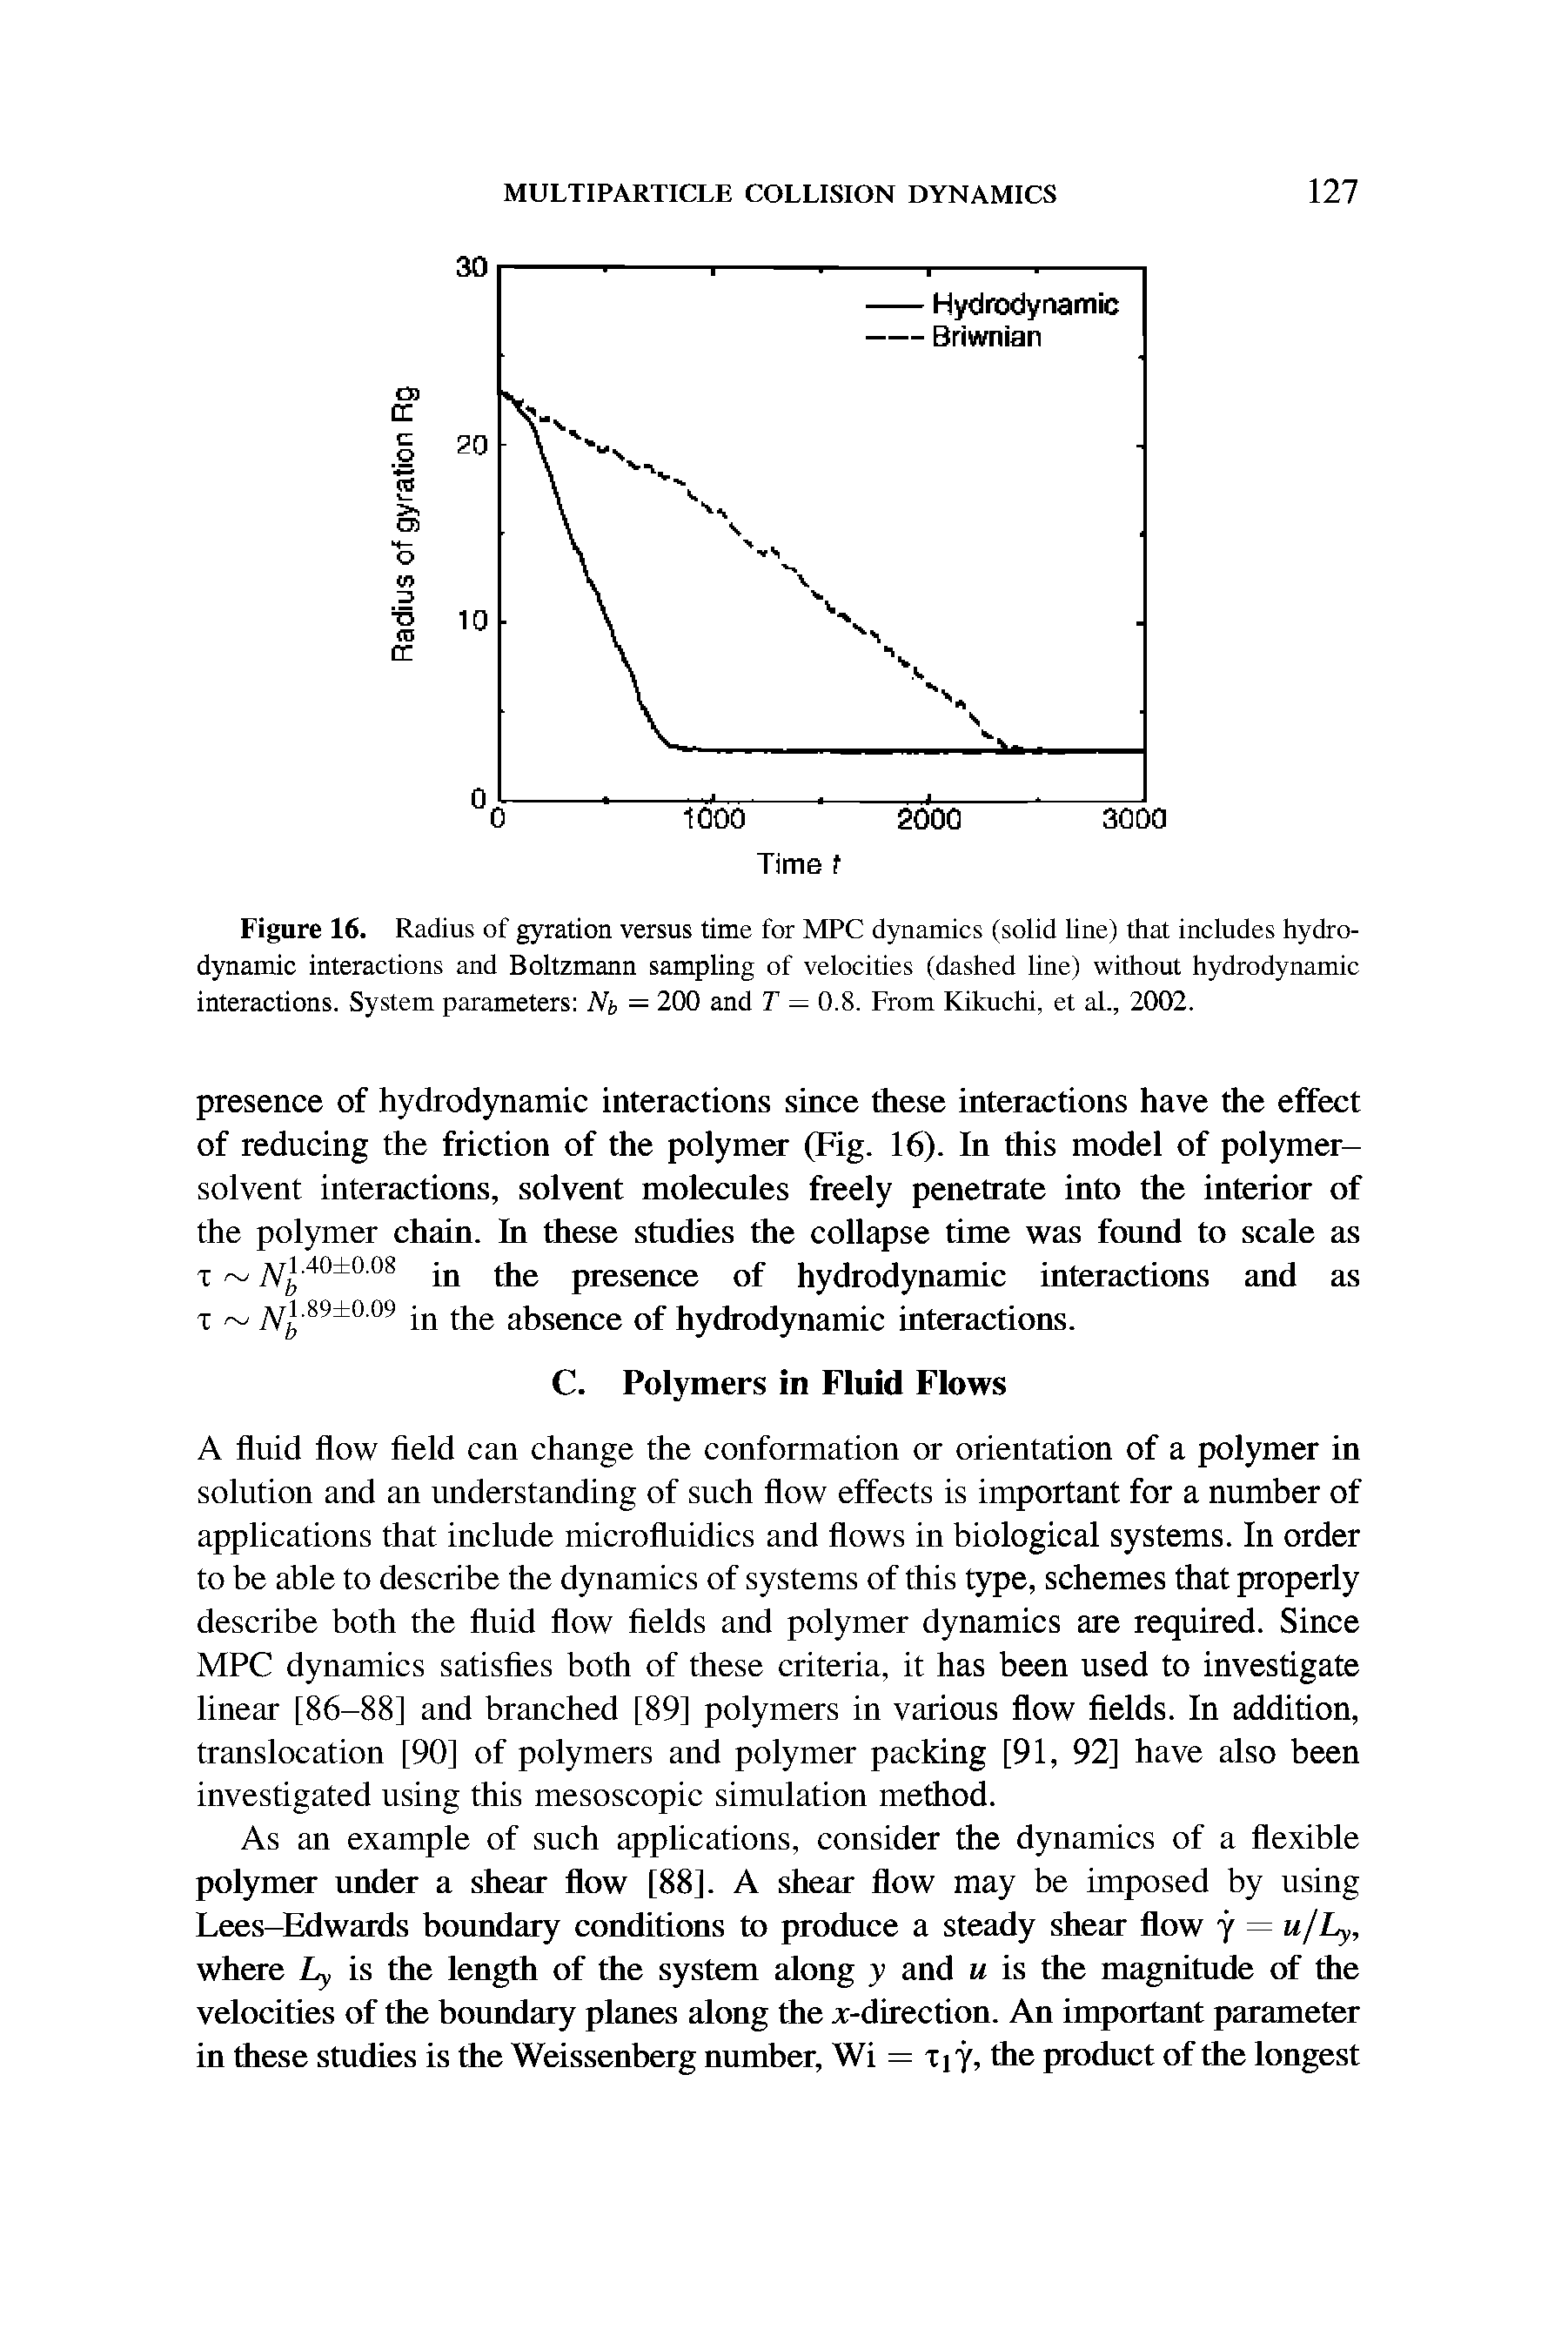 Figure 16. Radius of gyration versus time for MPC dynamics (solid line) that includes hydro-dynamic interactions and Boltzmann sampling of velocities (dashed line) without hydrodynamic interactions. System parameters Nb — 200 and T — 0.8. From Kikuchi, et al., 2002.